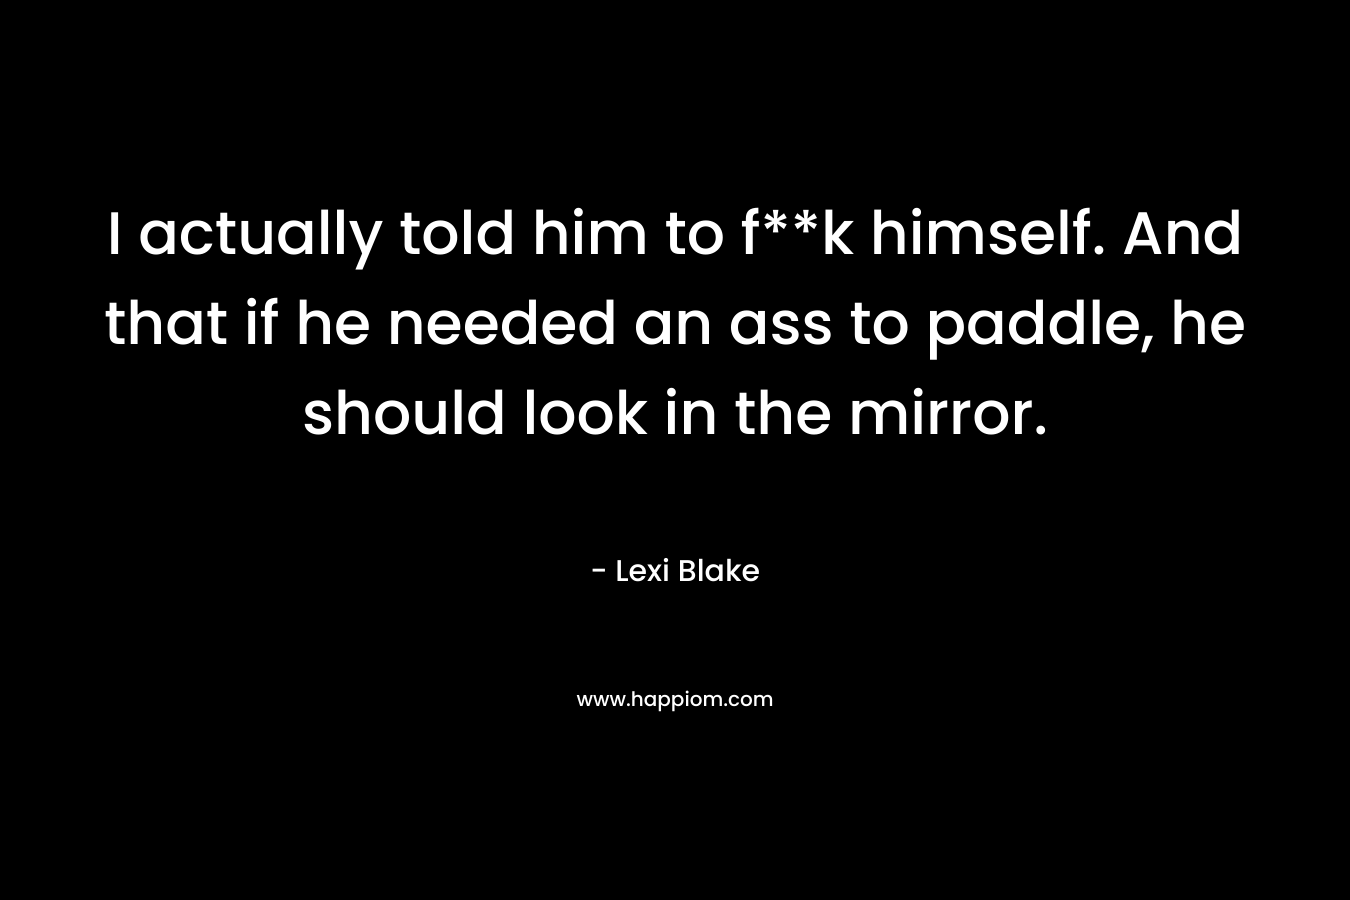 I actually told him to f**k himself. And that if he needed an ass to paddle, he should look in the mirror. – Lexi Blake